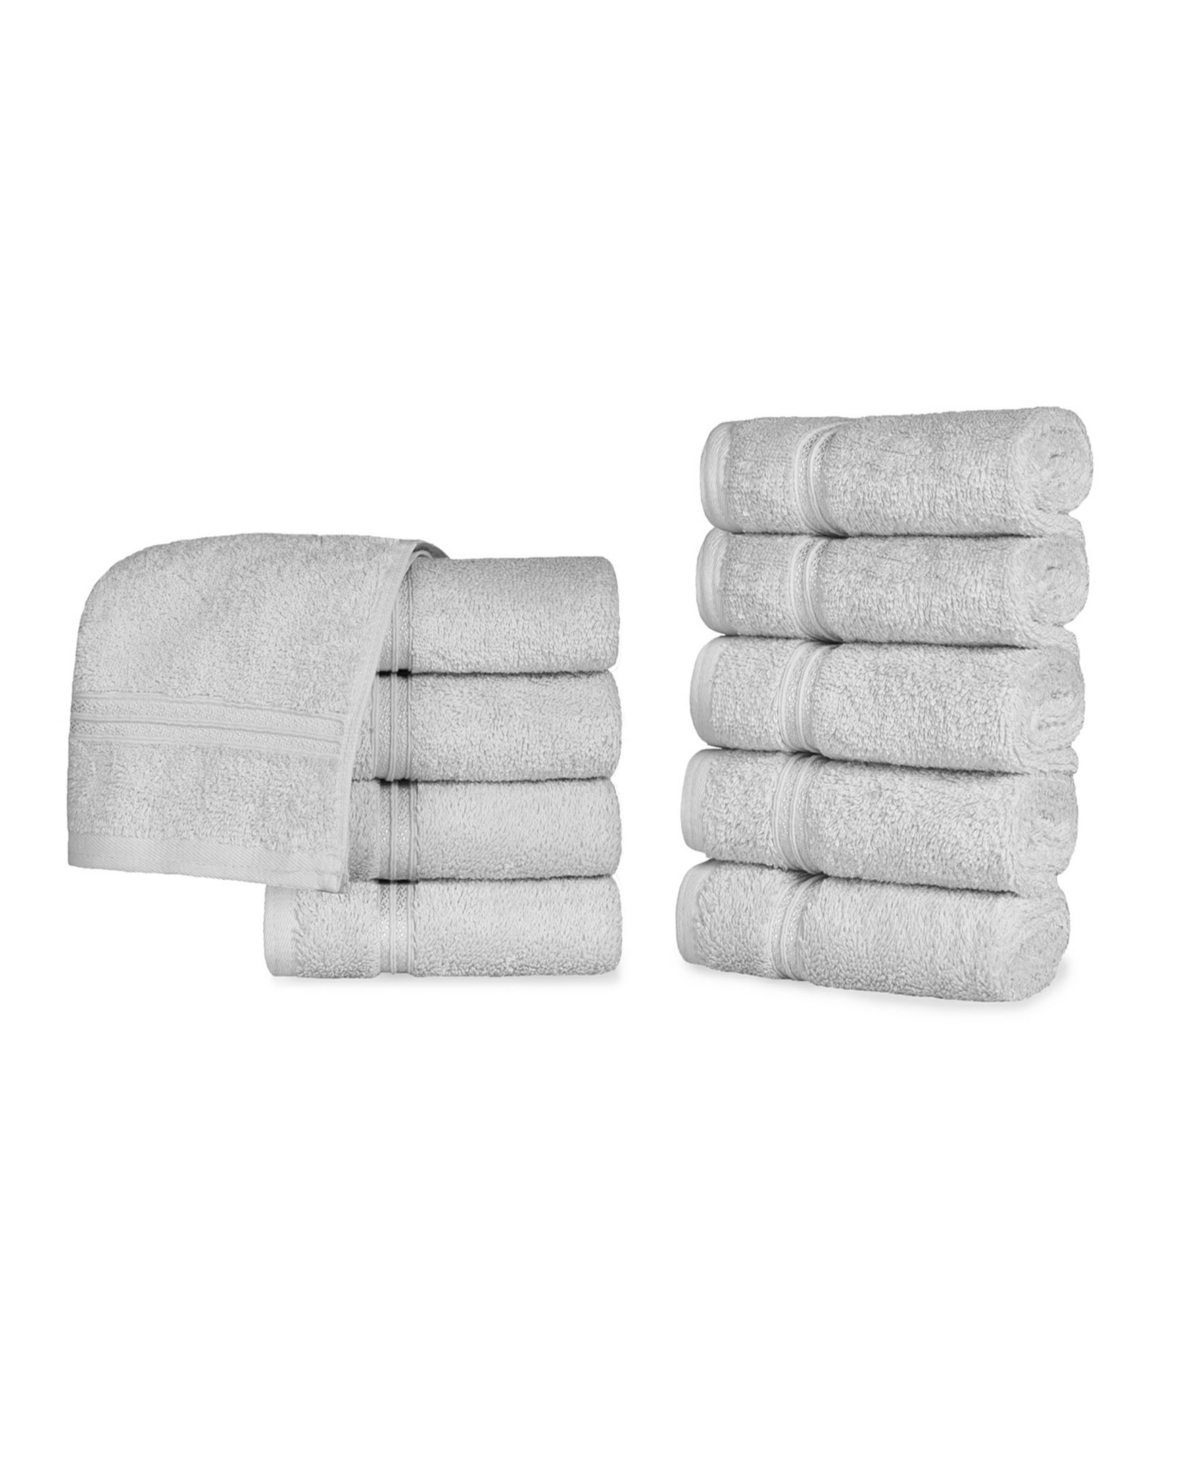 Superior Solid Quick Drying Absorbent 10 Piece Egyptian Cotton Face Towel Set Bedding In Silver